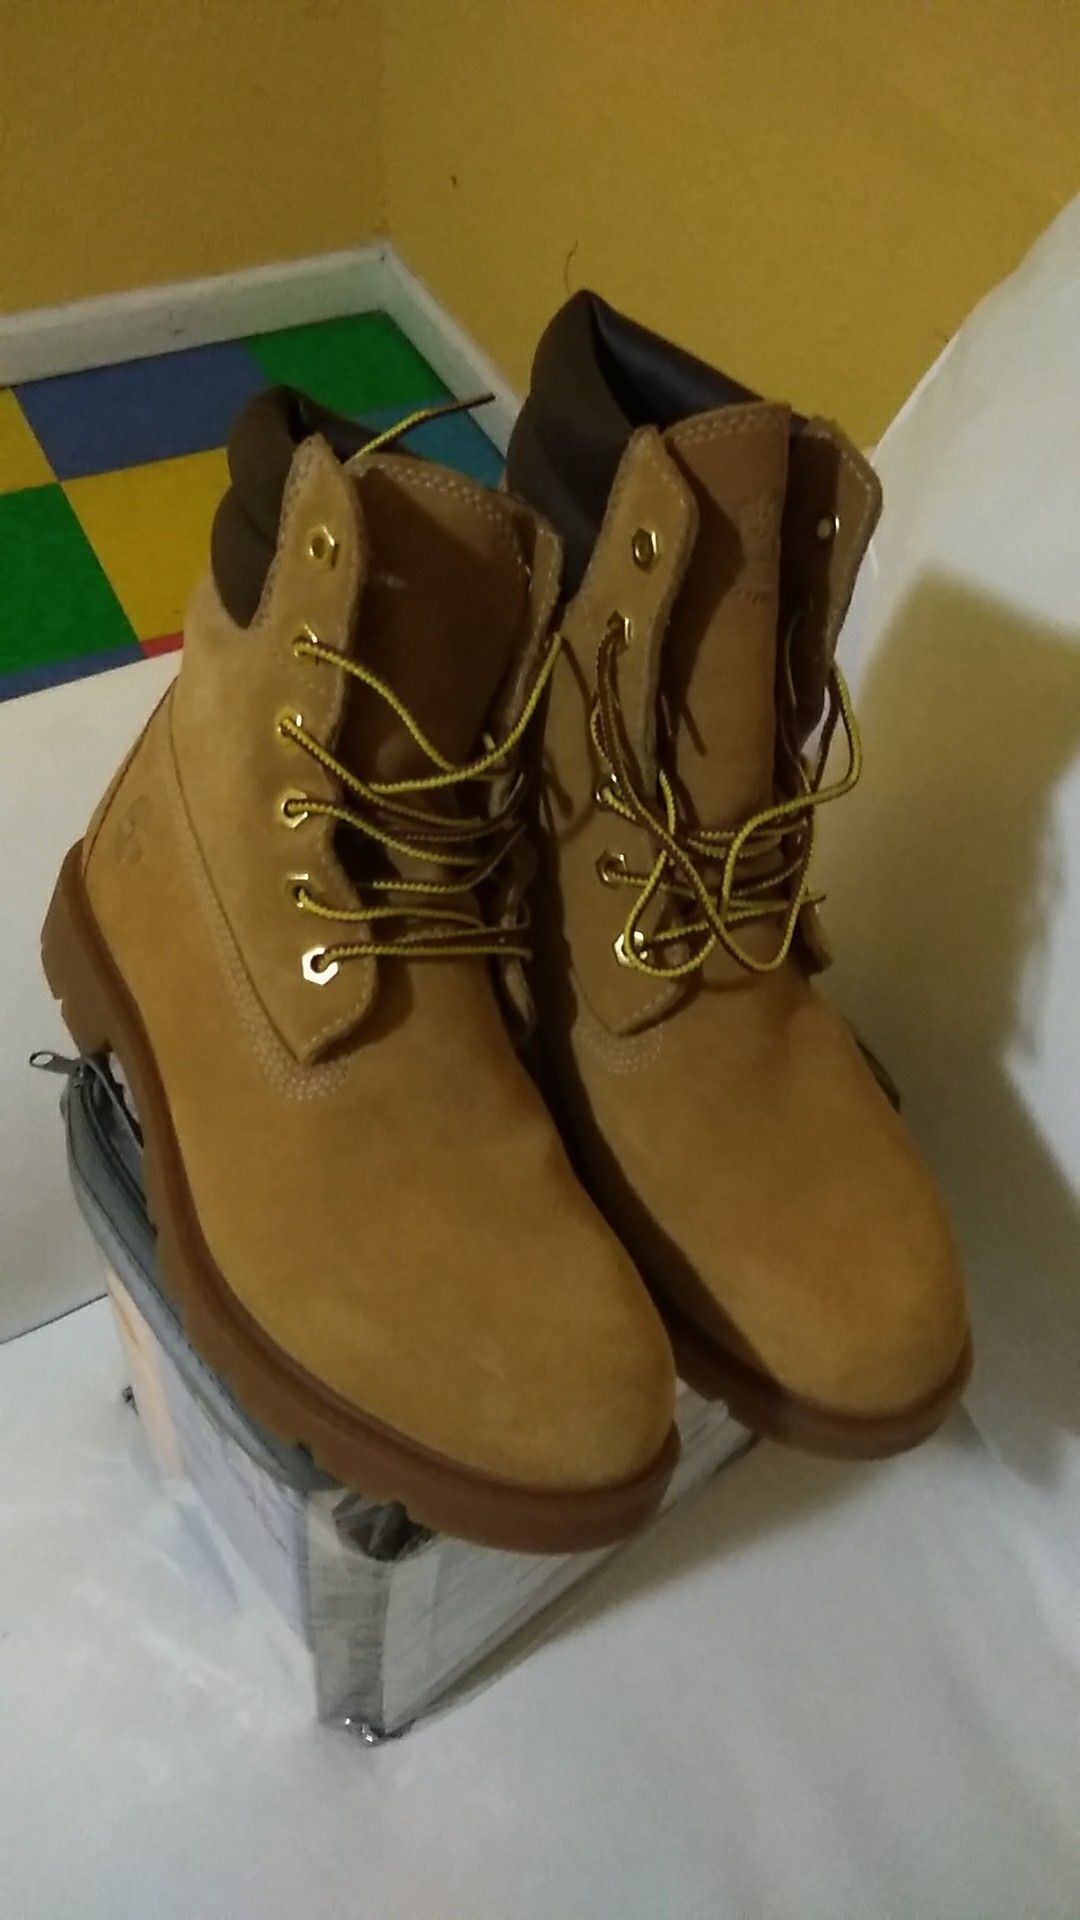 Brand new pair of suede Timberland boots for women size 8 and 1/2